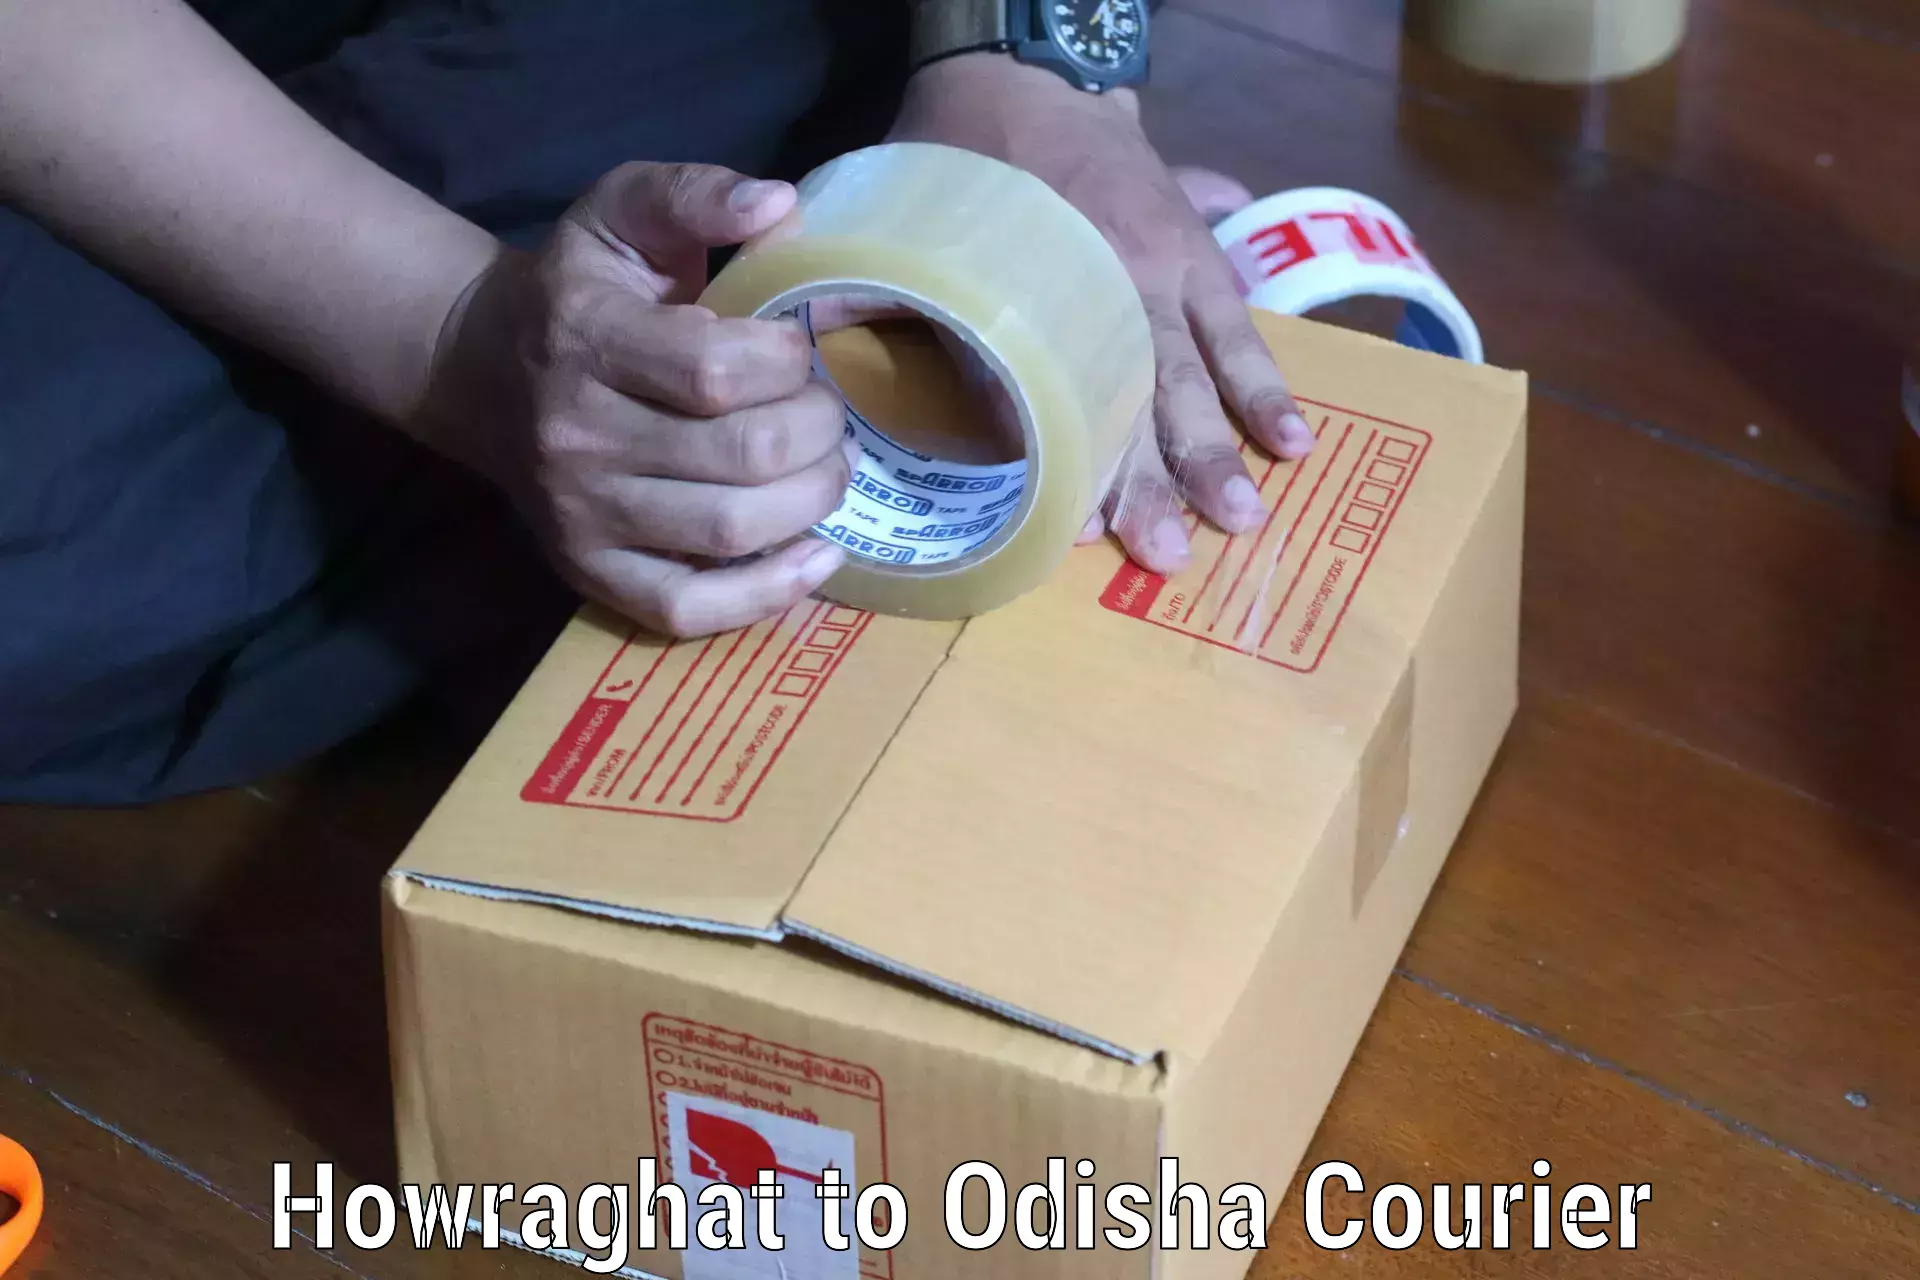 State-of-the-art courier technology Howraghat to Babujang